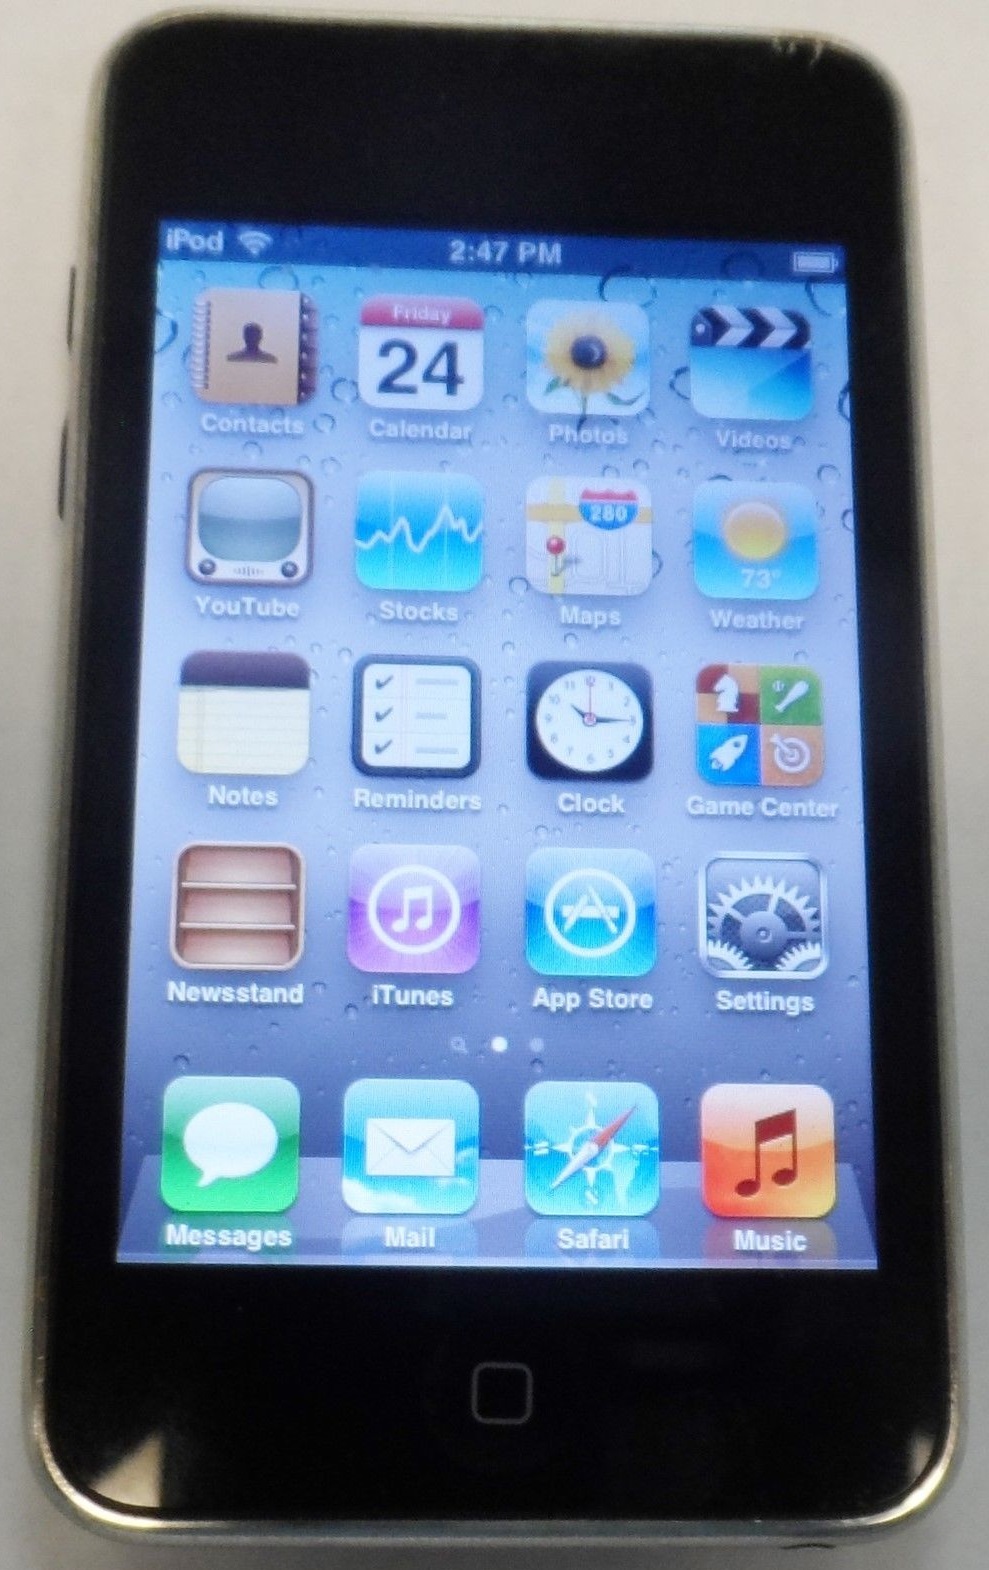 Black A1288-8GB & Higher Size Apple iPod Touch 2nd Generation Used Tested 